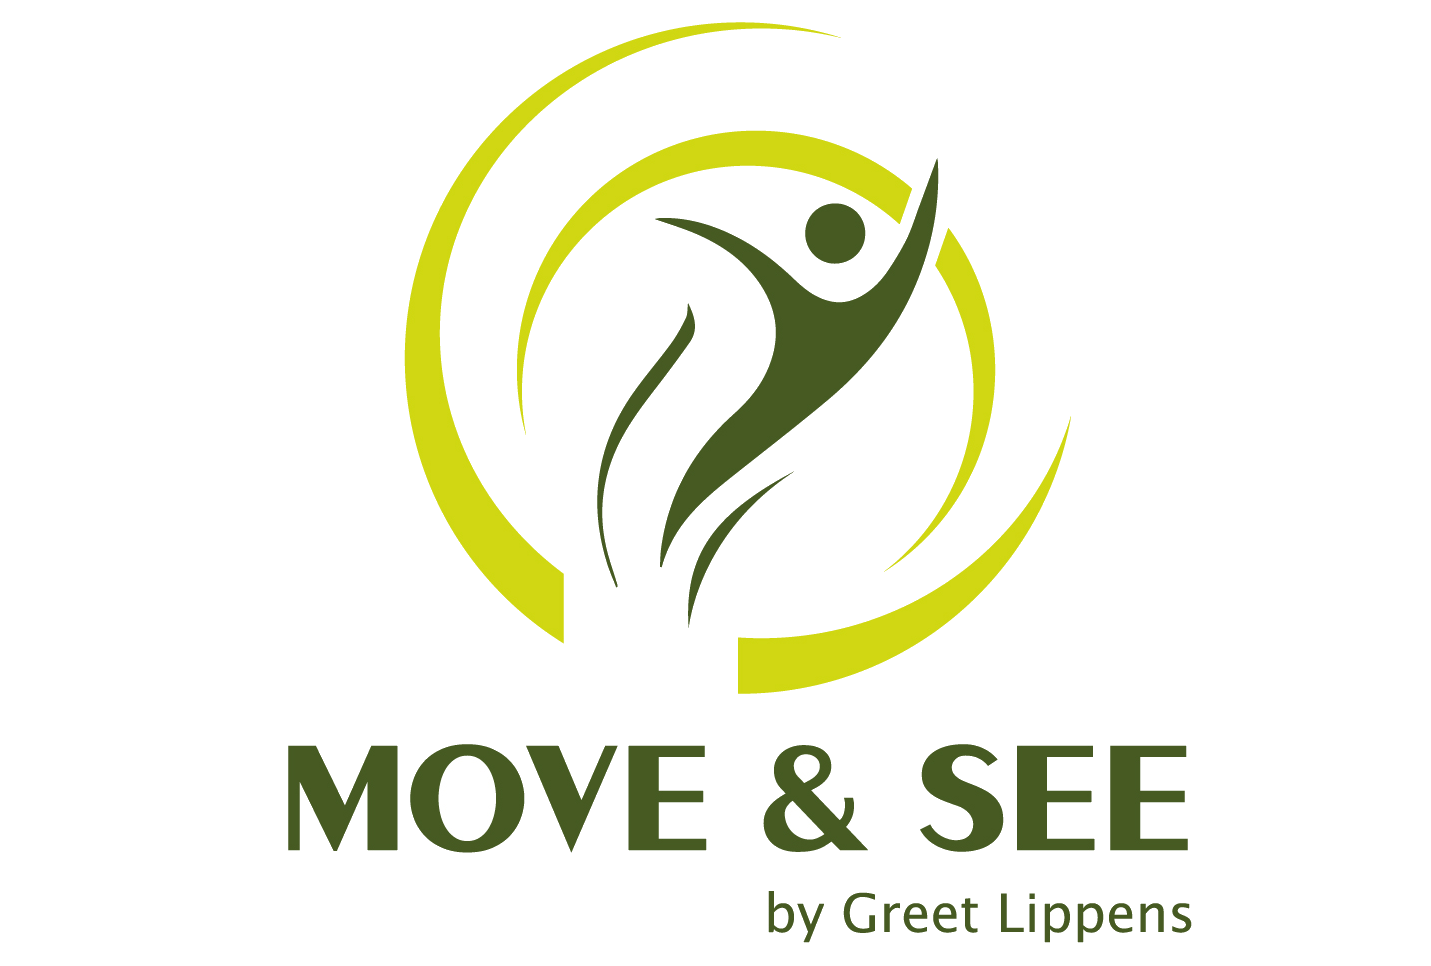 Move & See by Greet Lippens